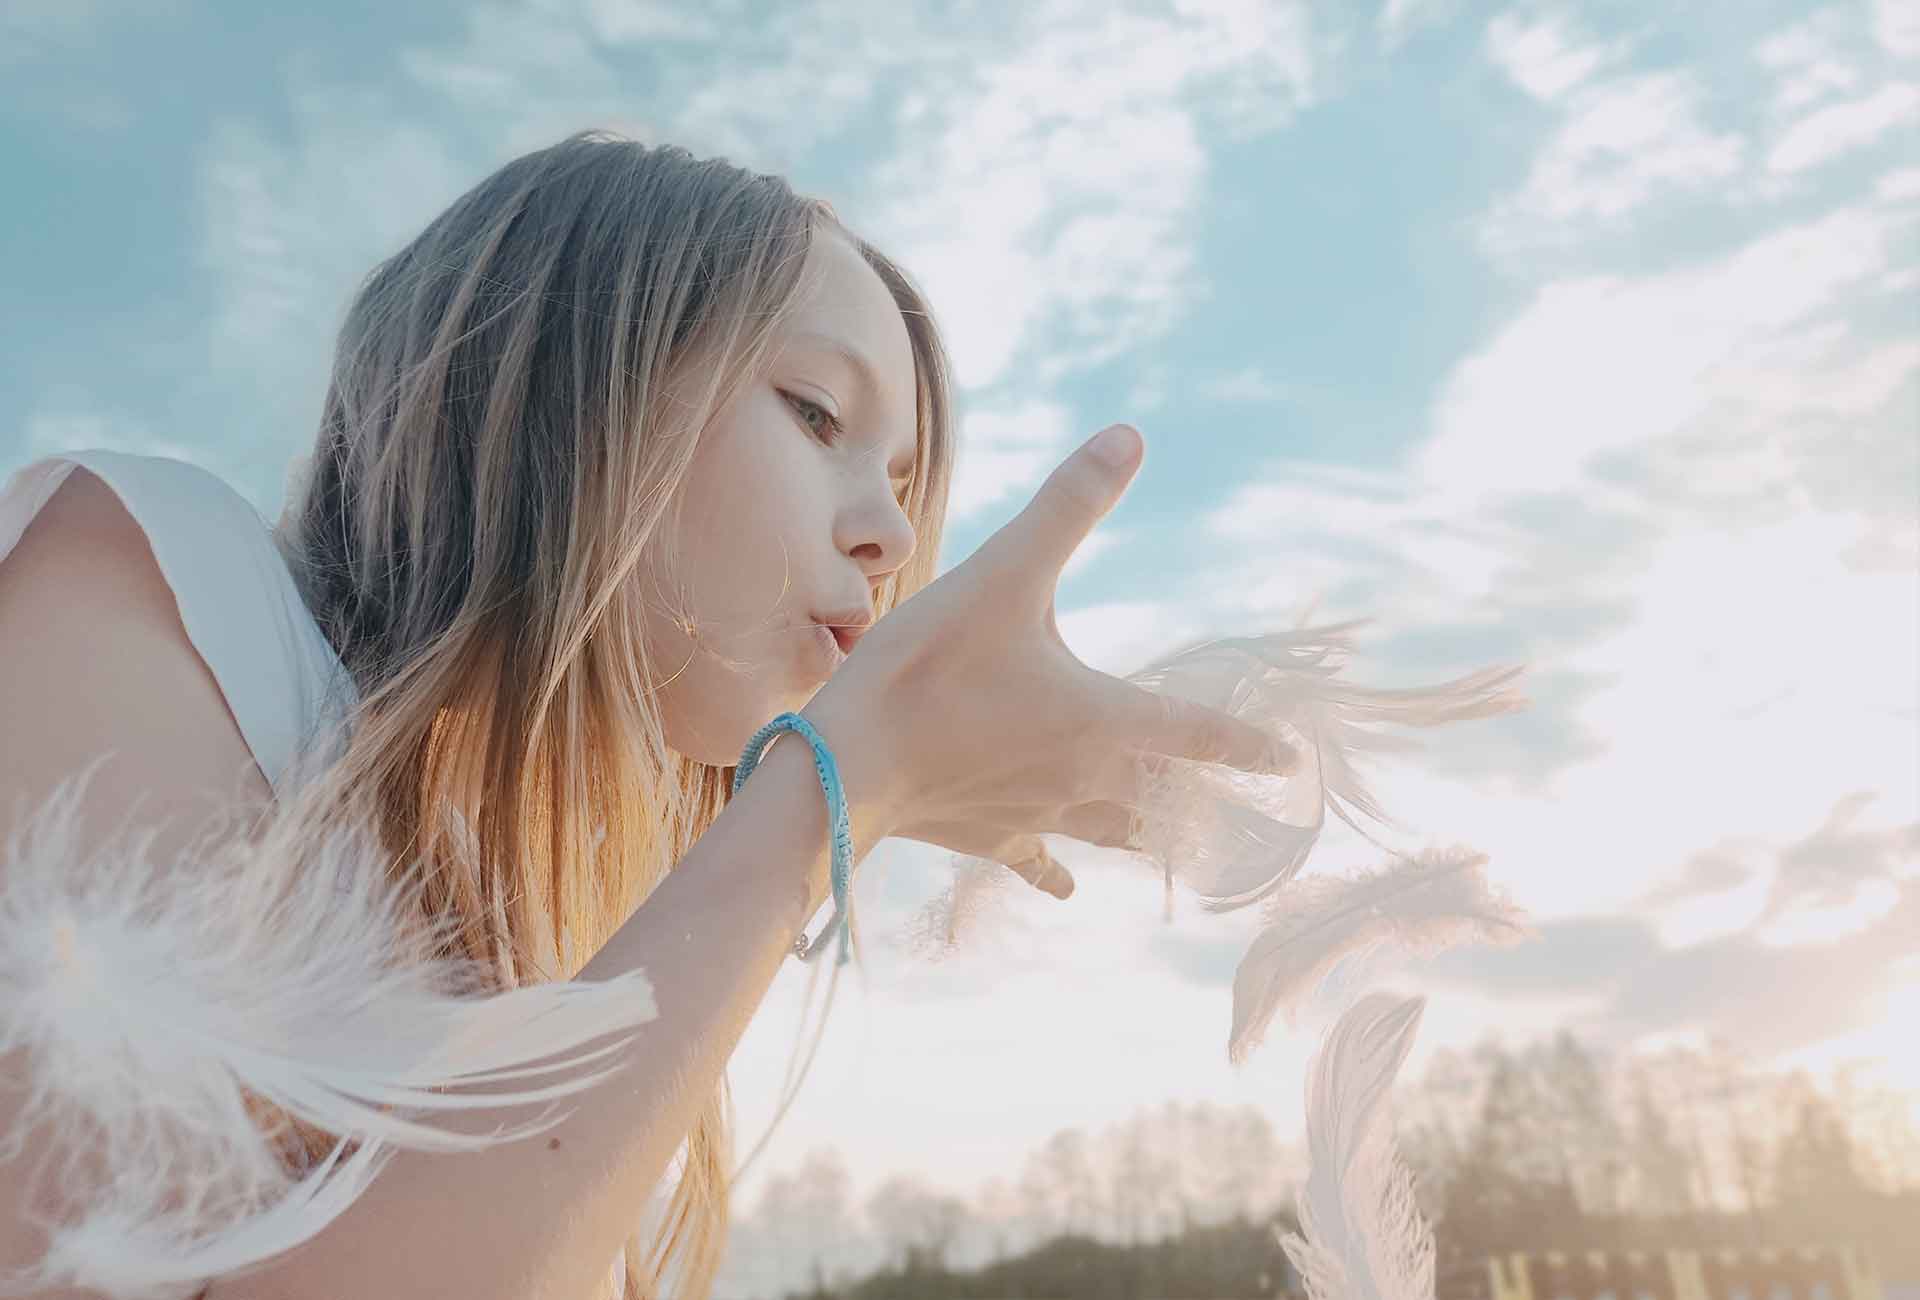 Blowing feathers of a bird in beautiful air